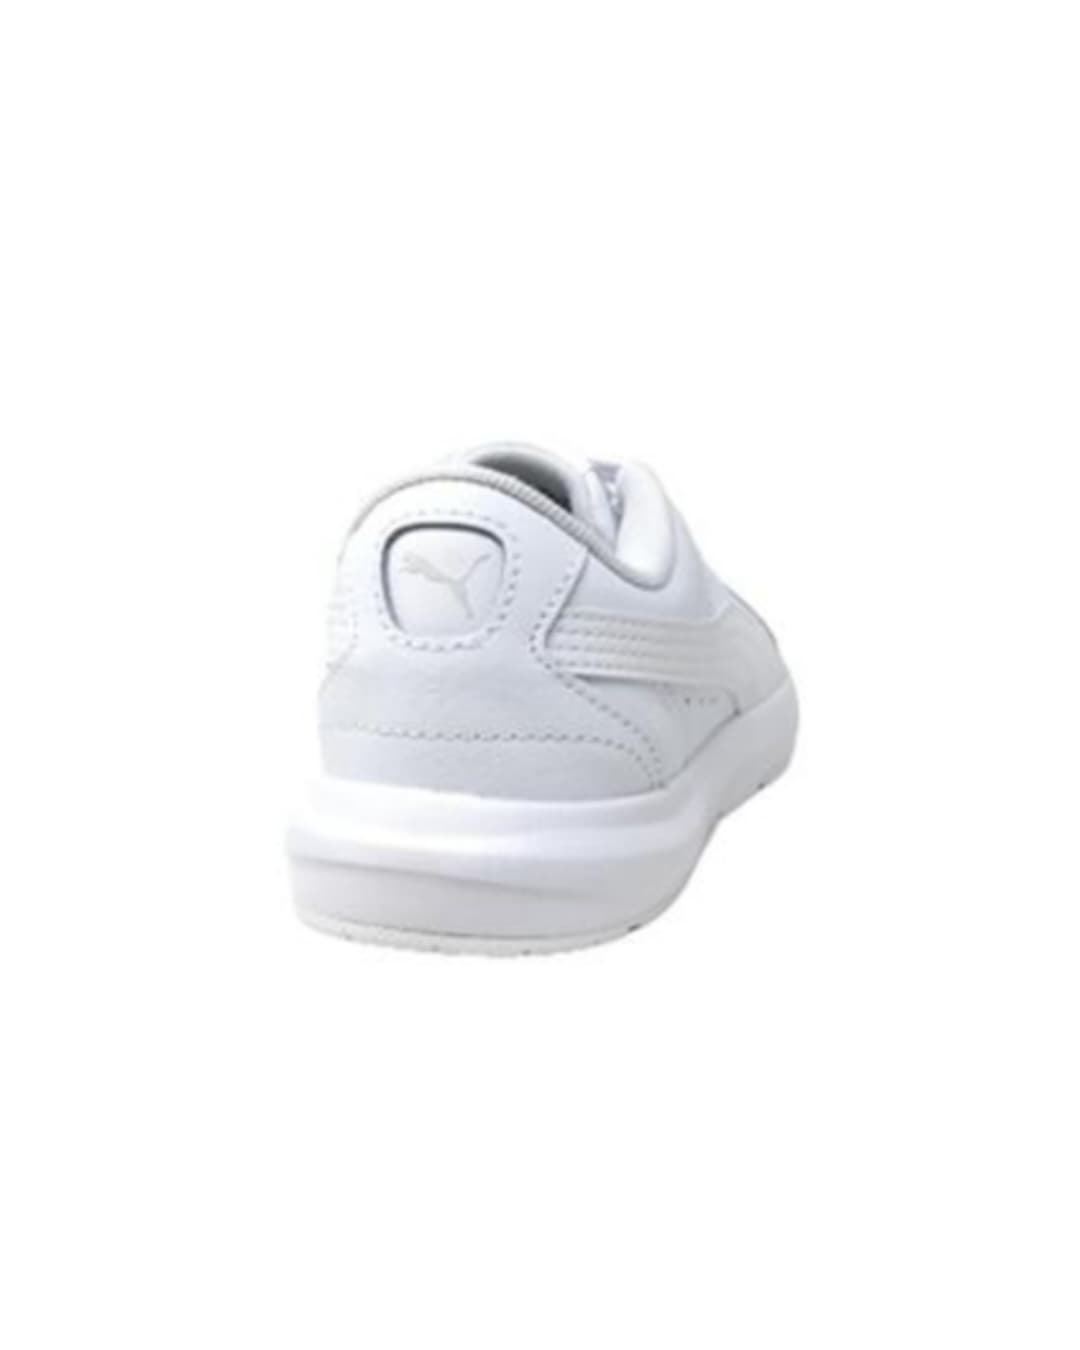 Puma Evolve Court Jr White Children's Sneakers with Lace - Image 2